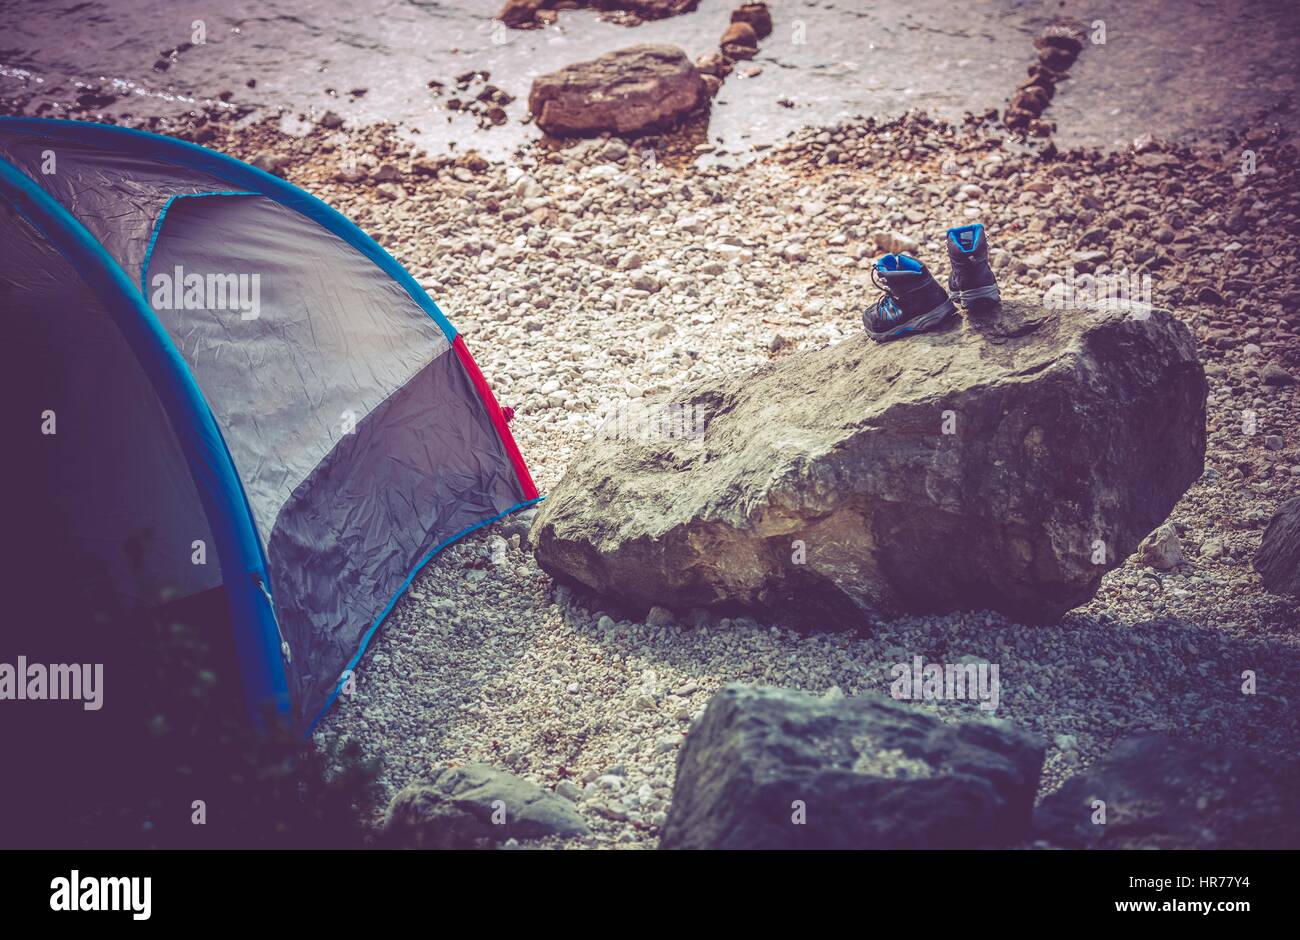 Lake Camping Scenery. Campsite on the Rocky Lake Shore. Outdoor and Recreation Theme. Wet Shoes on the Boulder. Stock Photo